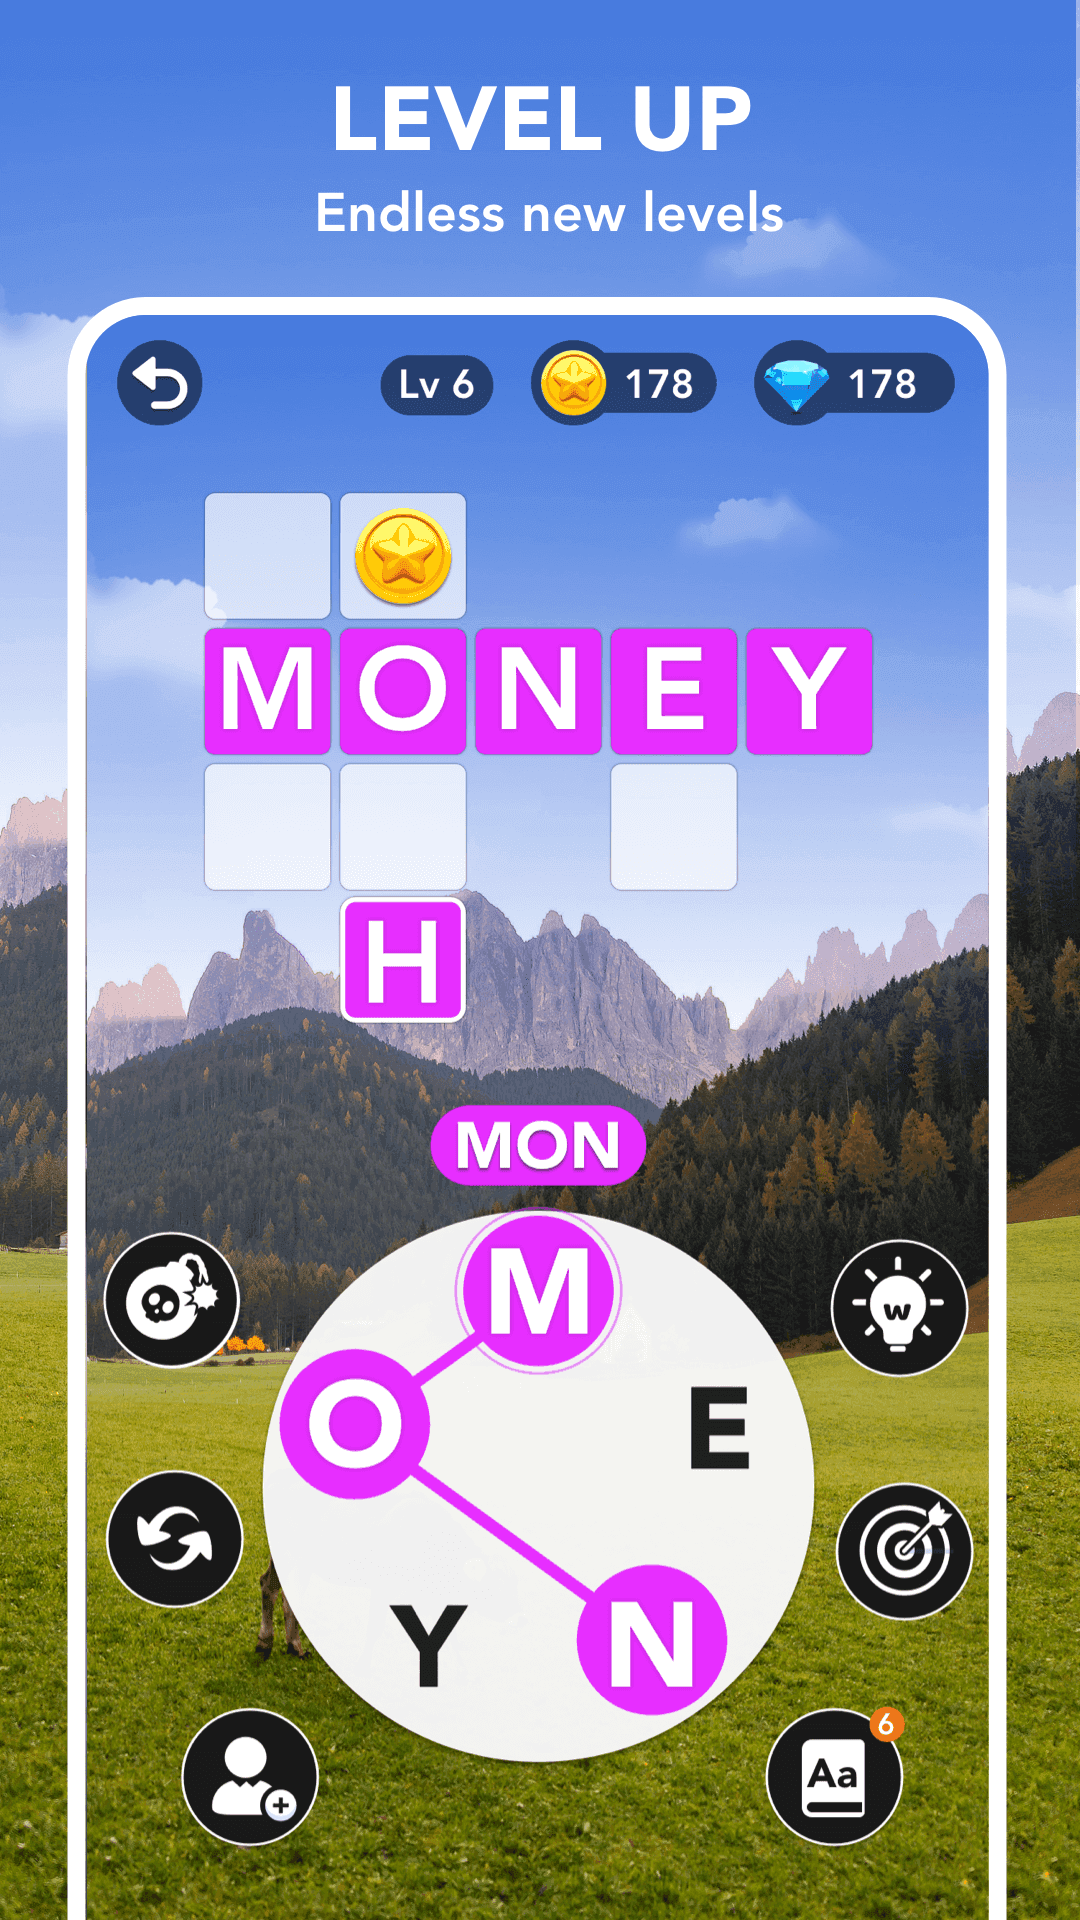 Screenshot of Wordy word - wordscape free & get relax